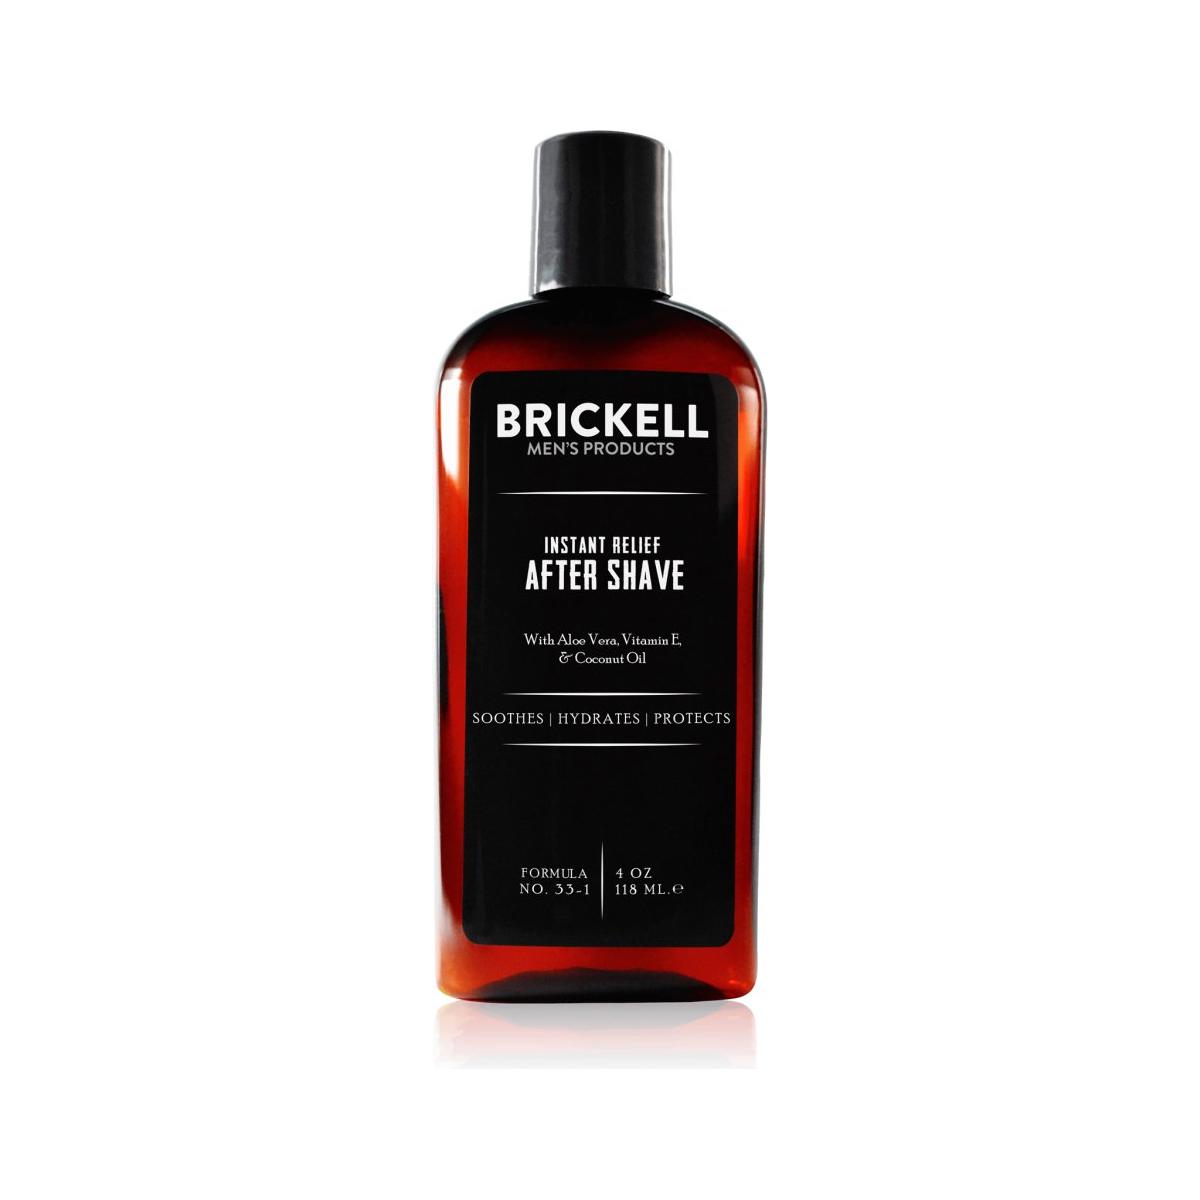 Brickell Instant Relief Aftershave - 118ml - Glam Global UK